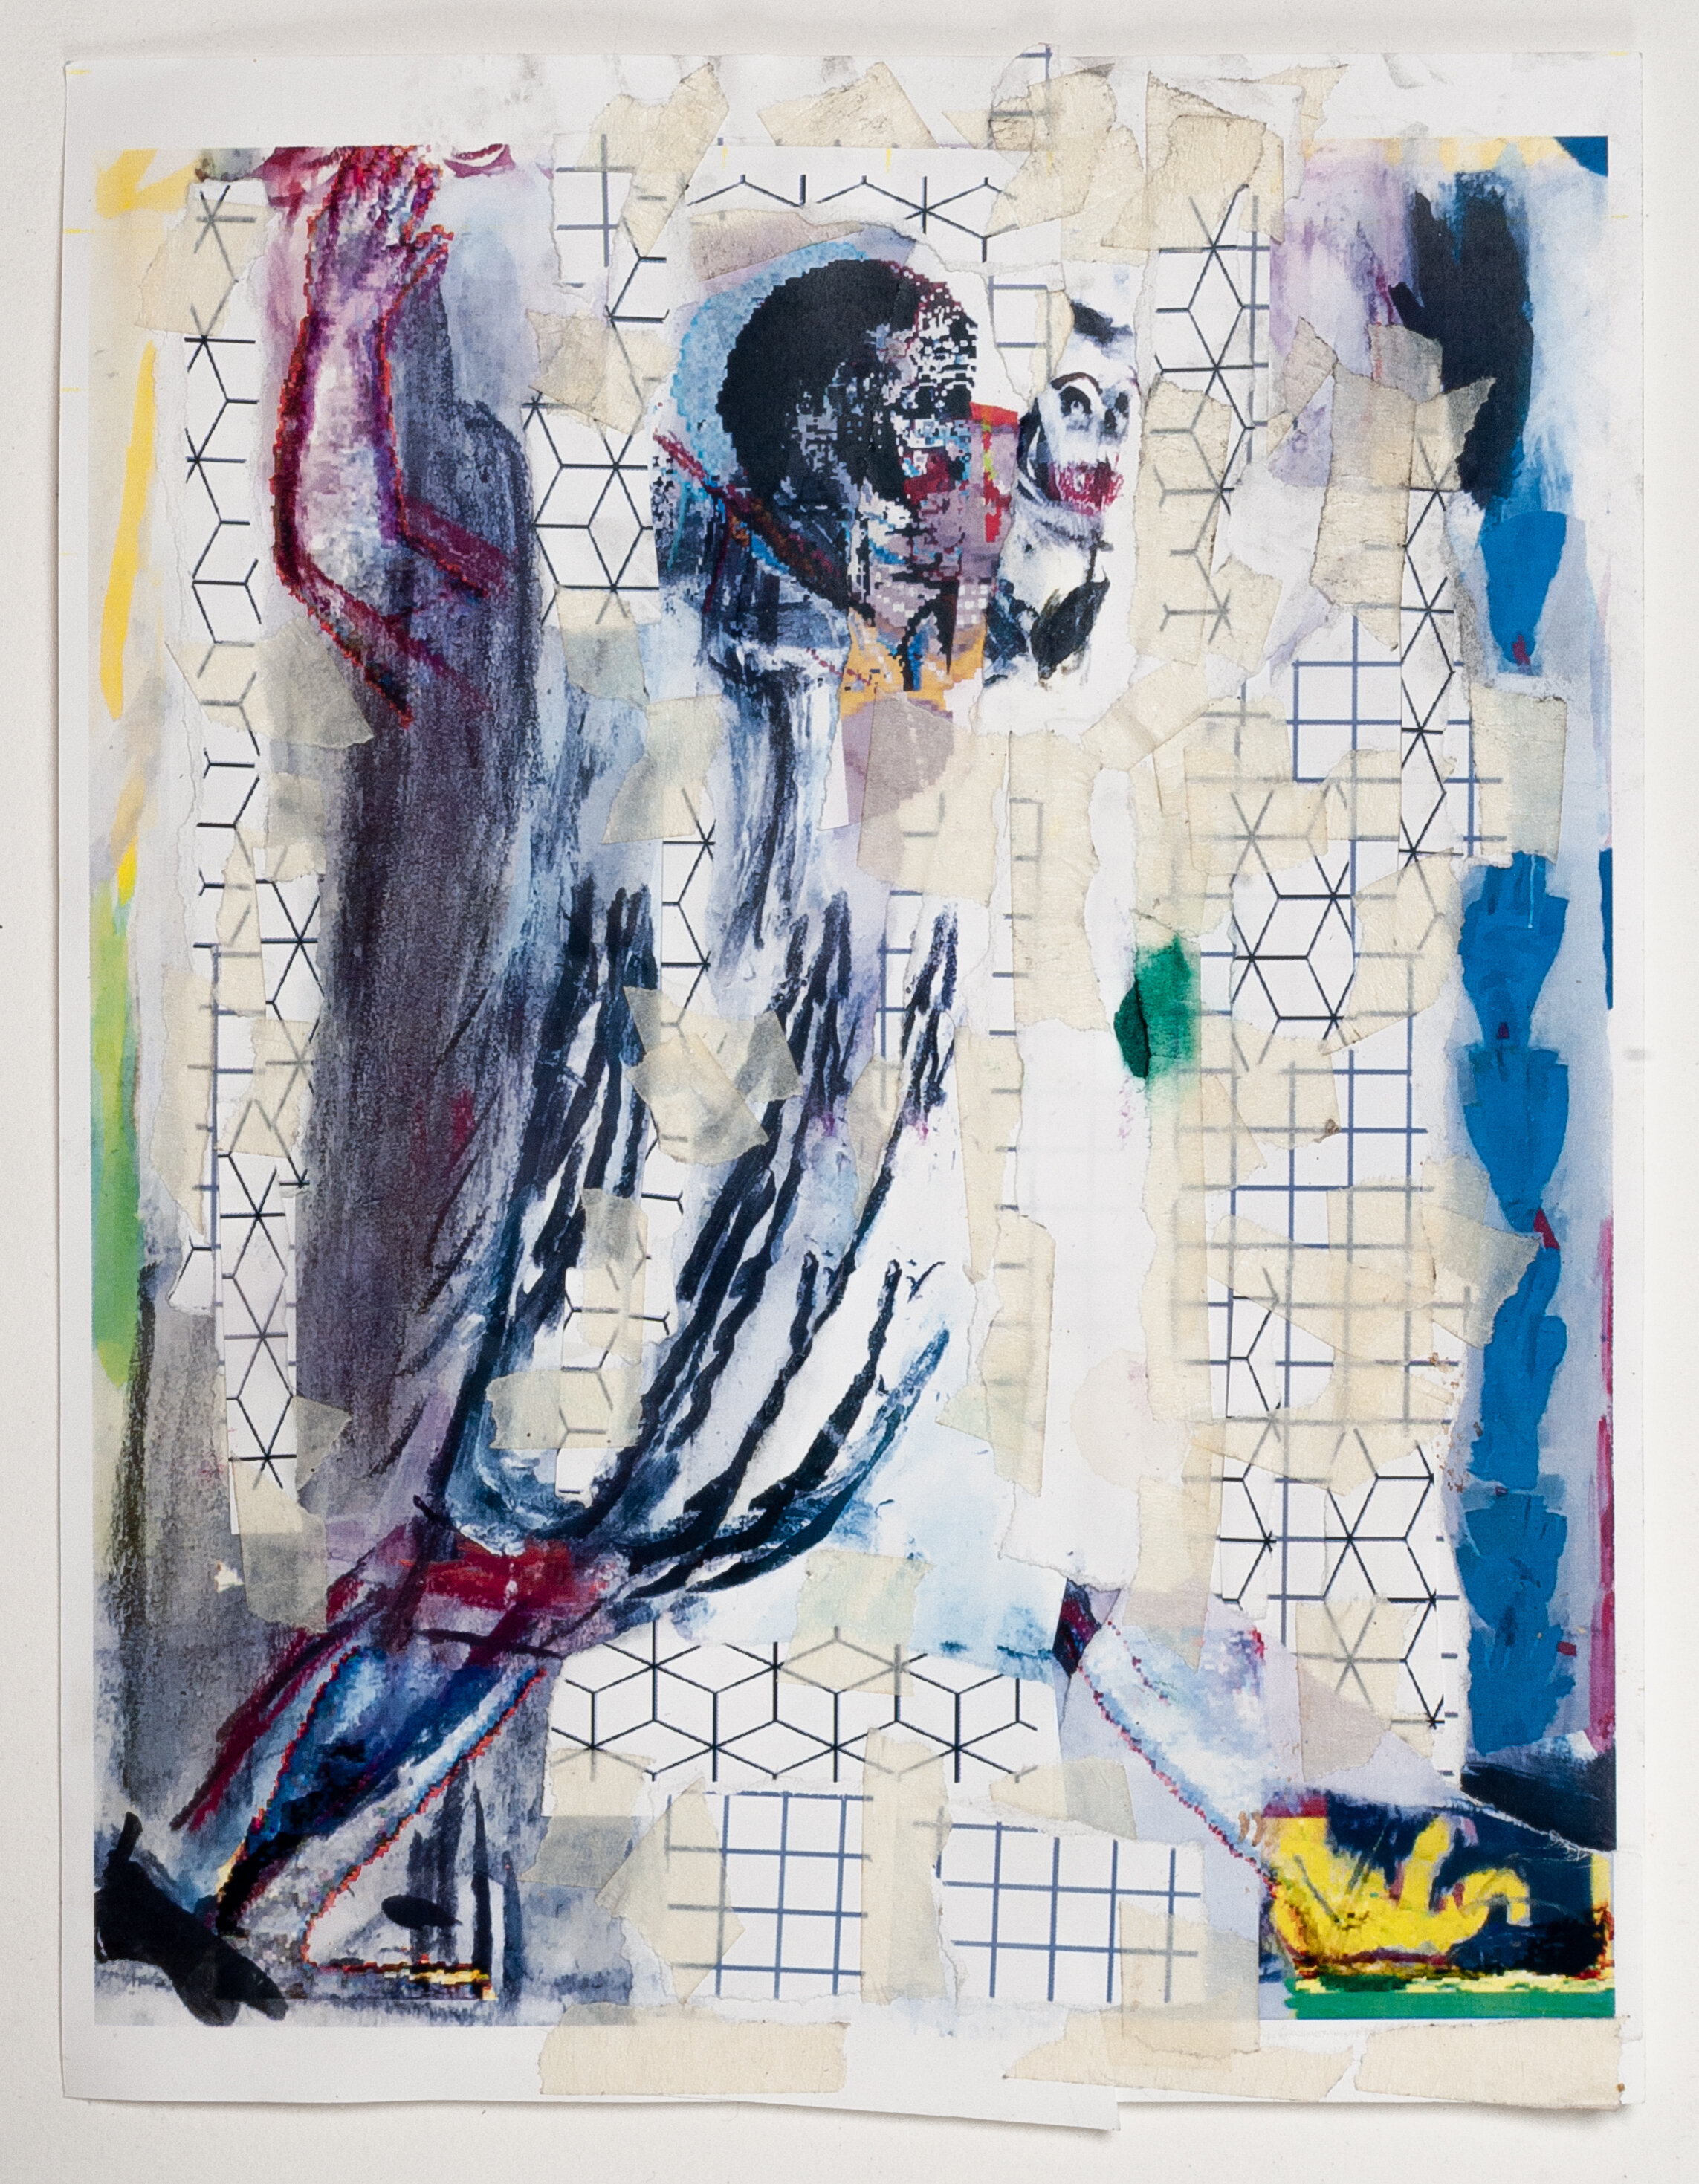   sm_wop2020_04 , 2020 mixed media and collage on paper, 11 x 8.5 in.  private collection  